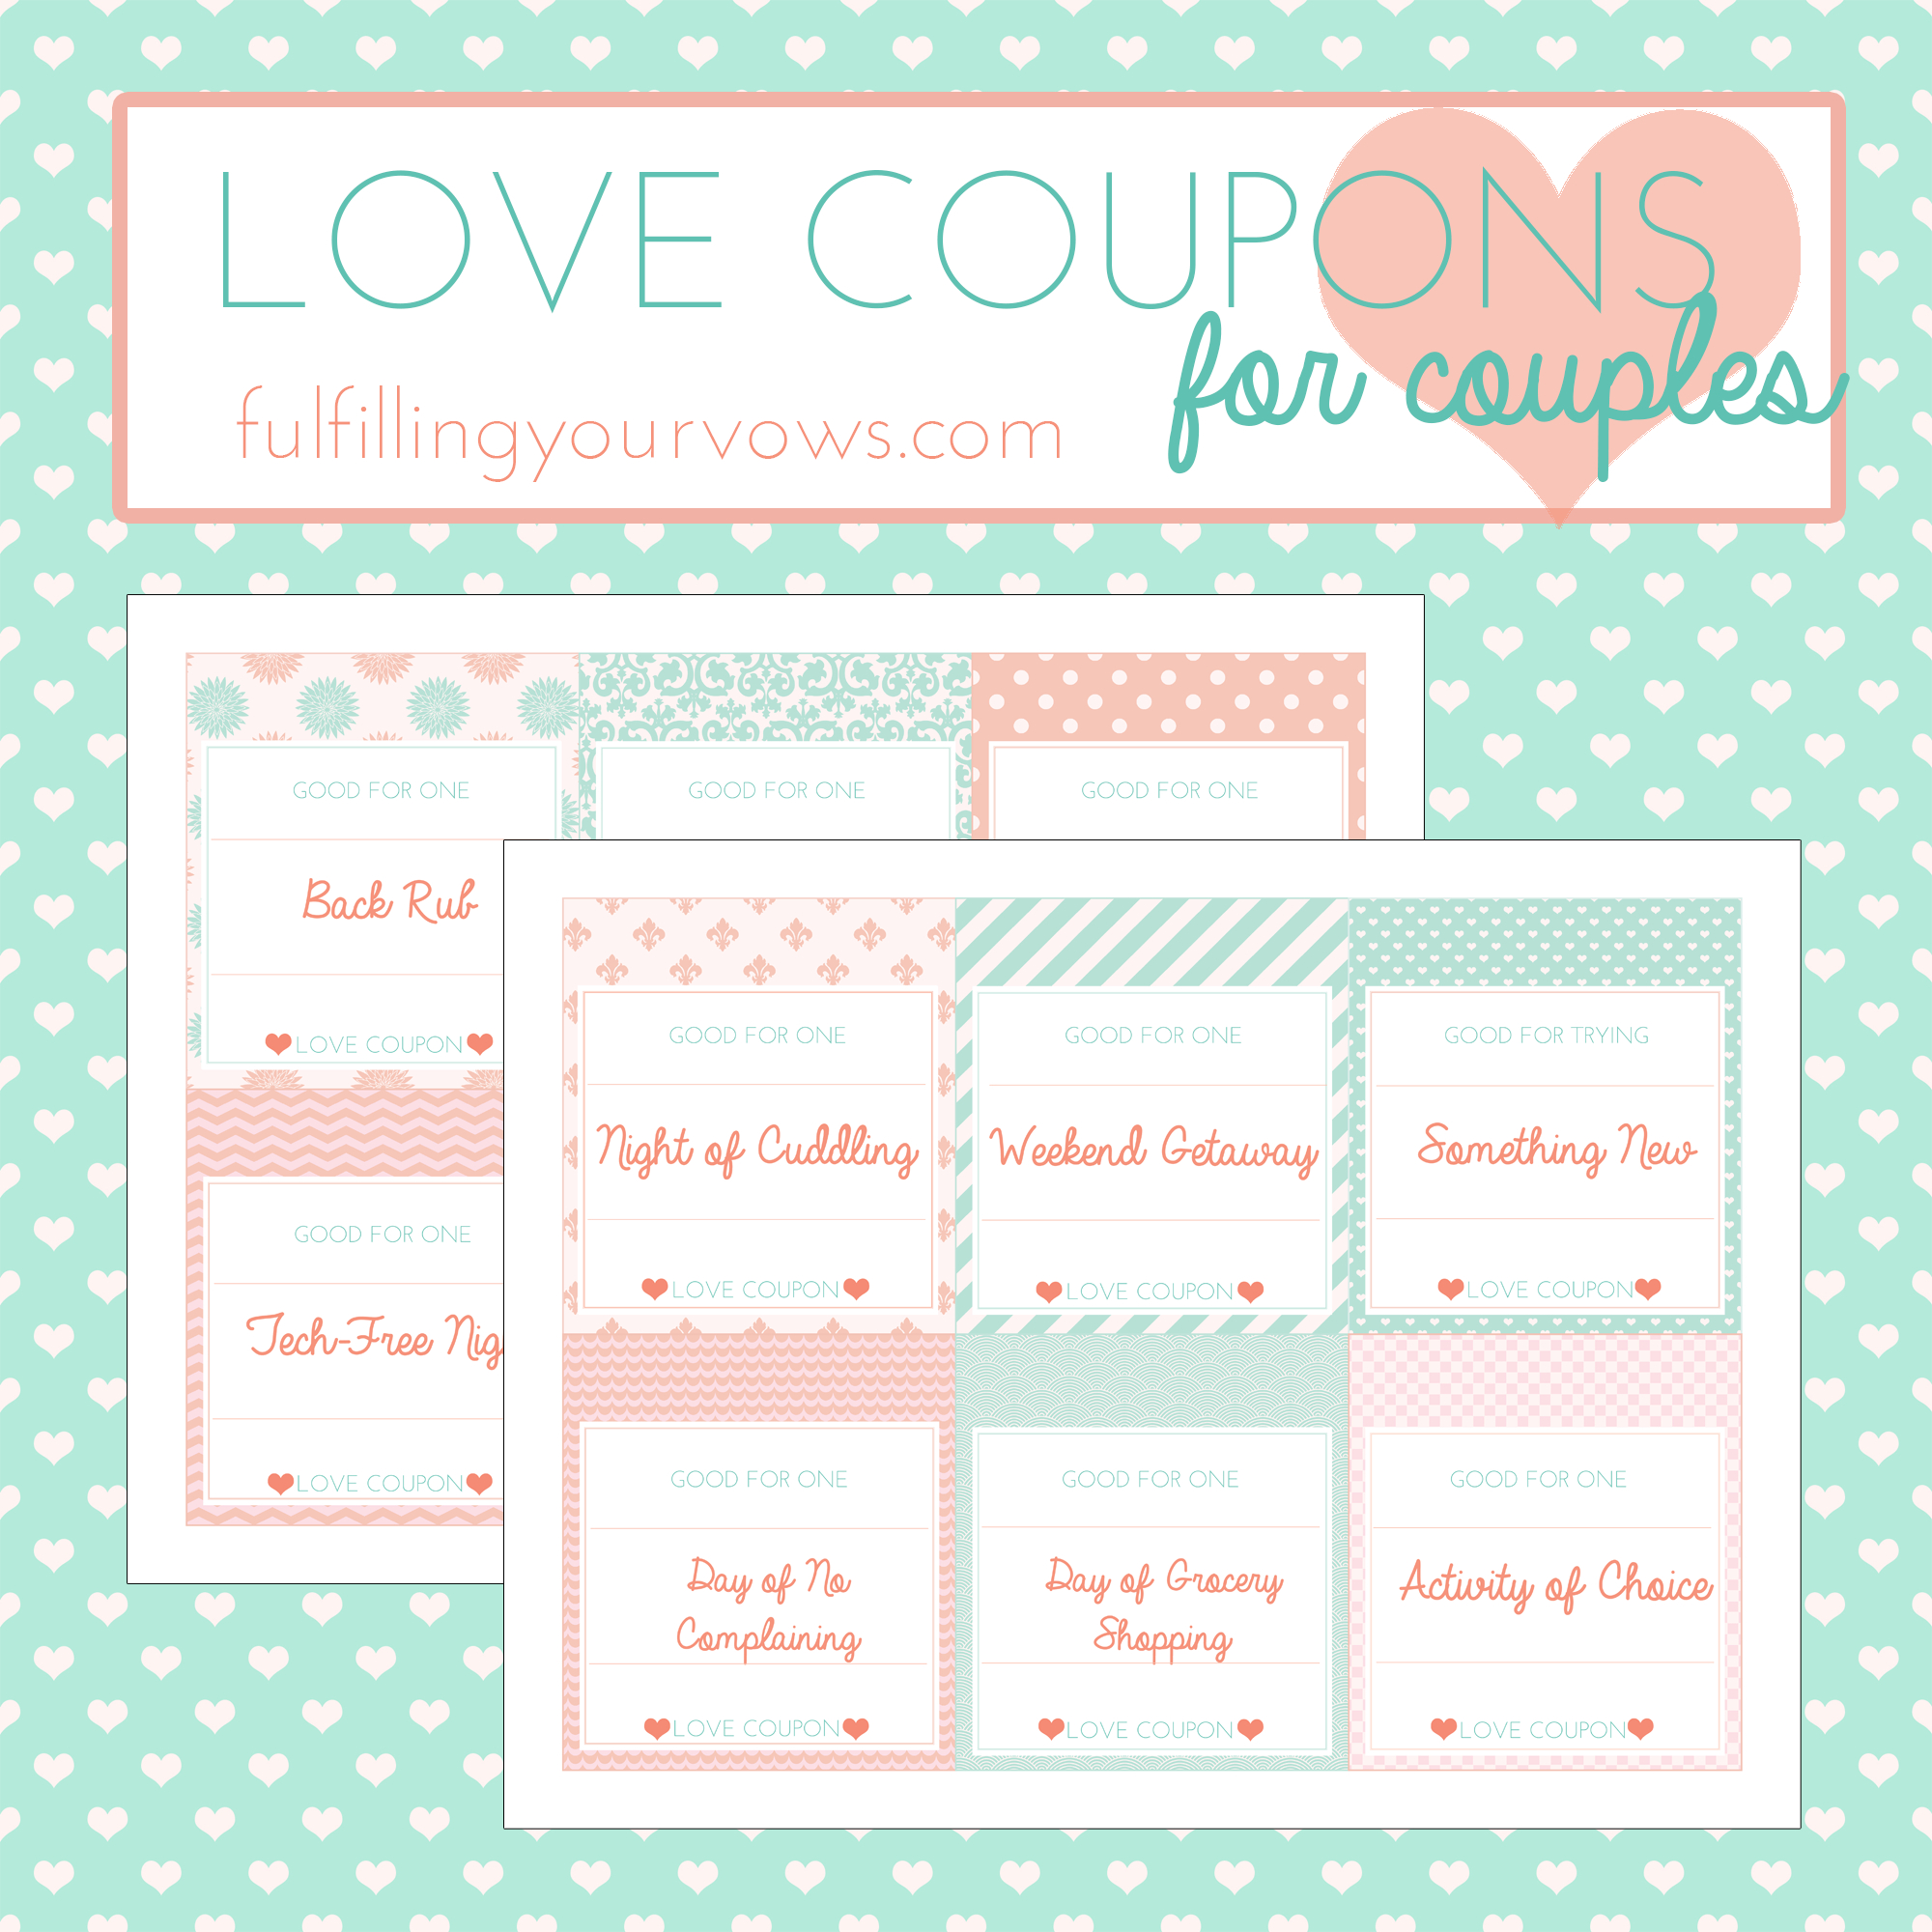 Free Printable Love Coupons For Couples - Fulfilling Your Vows - Free Printable Love Coupons For Wife